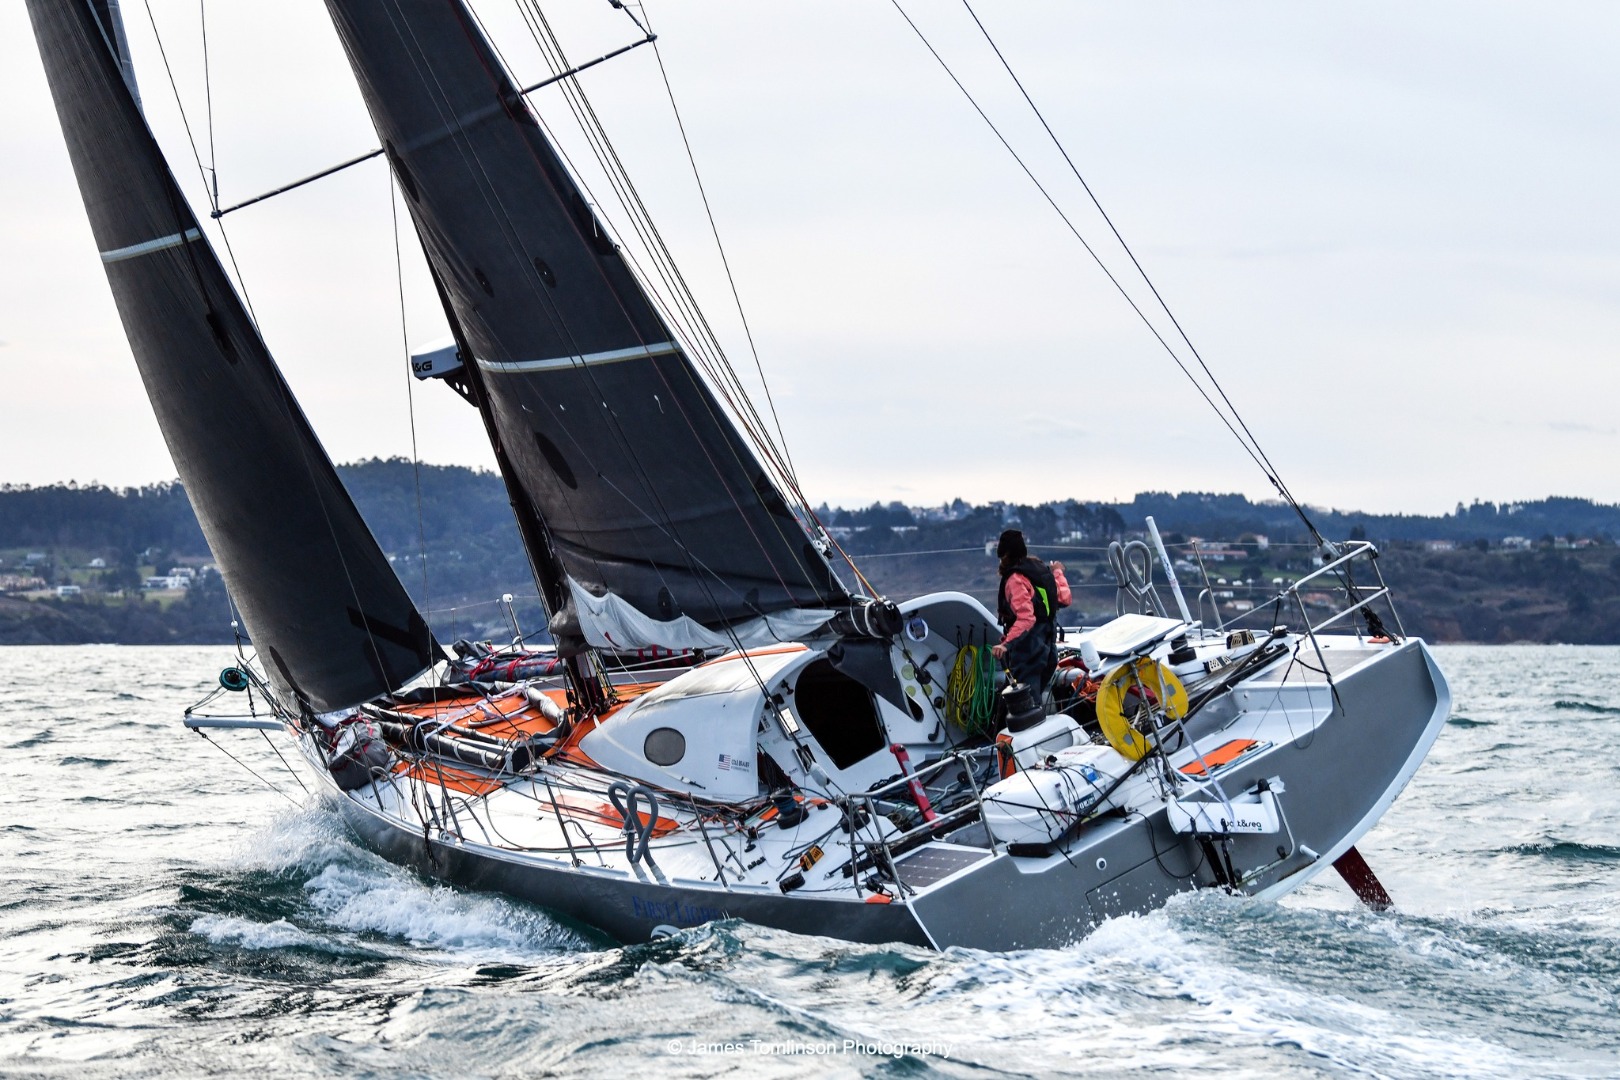 Image of Cole Brauer finishing the Global Solo Challenge, the first American woman to complete a solo race around the world non-stop, sailing First Light (ex Dragon), her Owen Clarke Design Class 40.